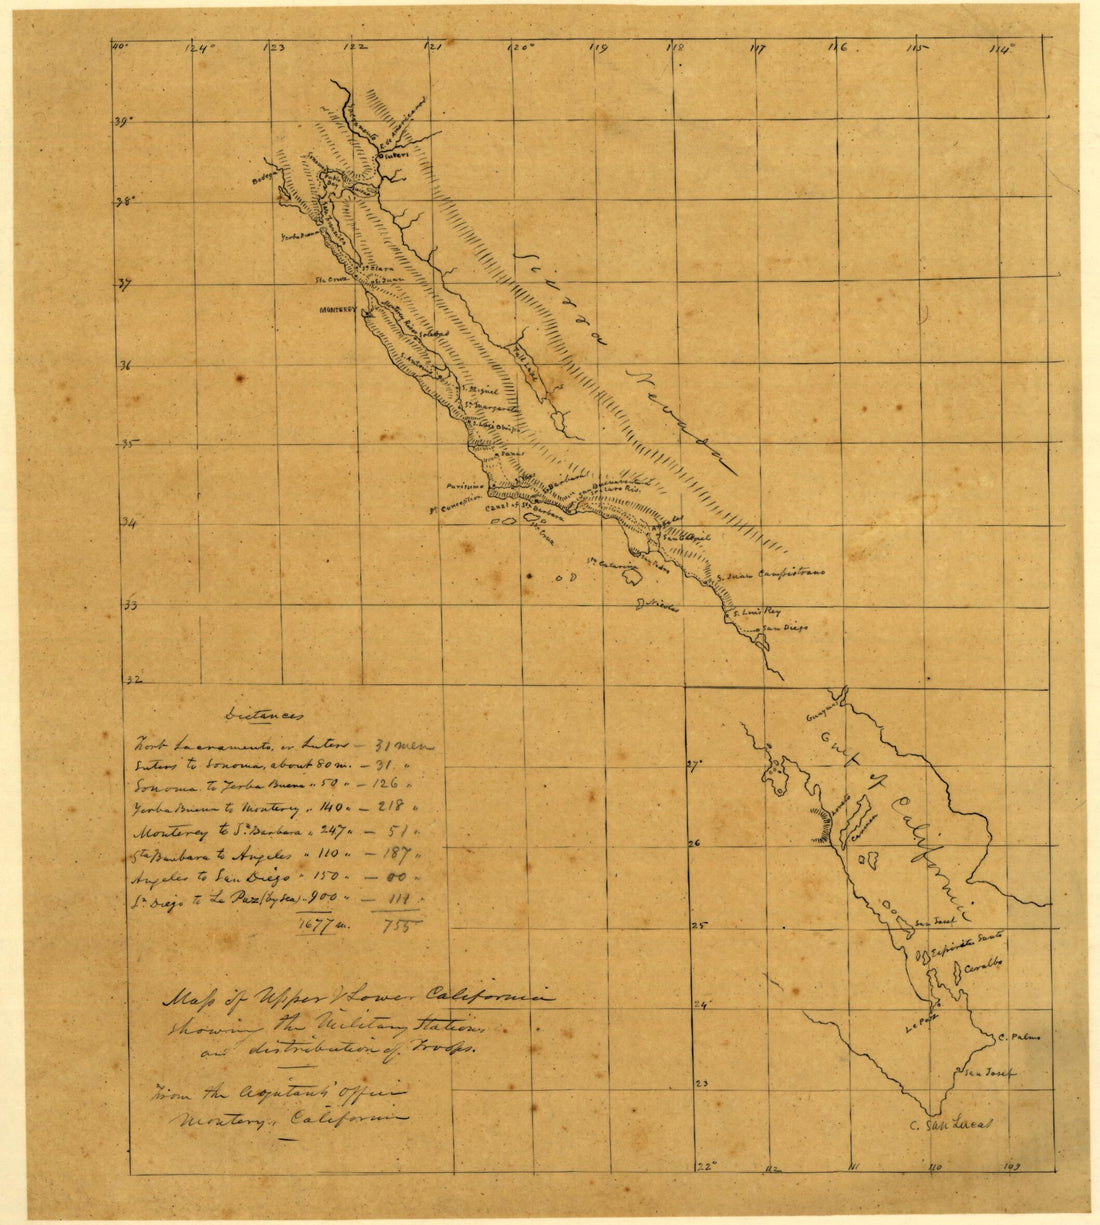 This old map of Map of Upper &amp; Lower California Showing the Military Stations and Distribution of Troops from 1847 was created by Joseph Goldsborough Bruff in 1847